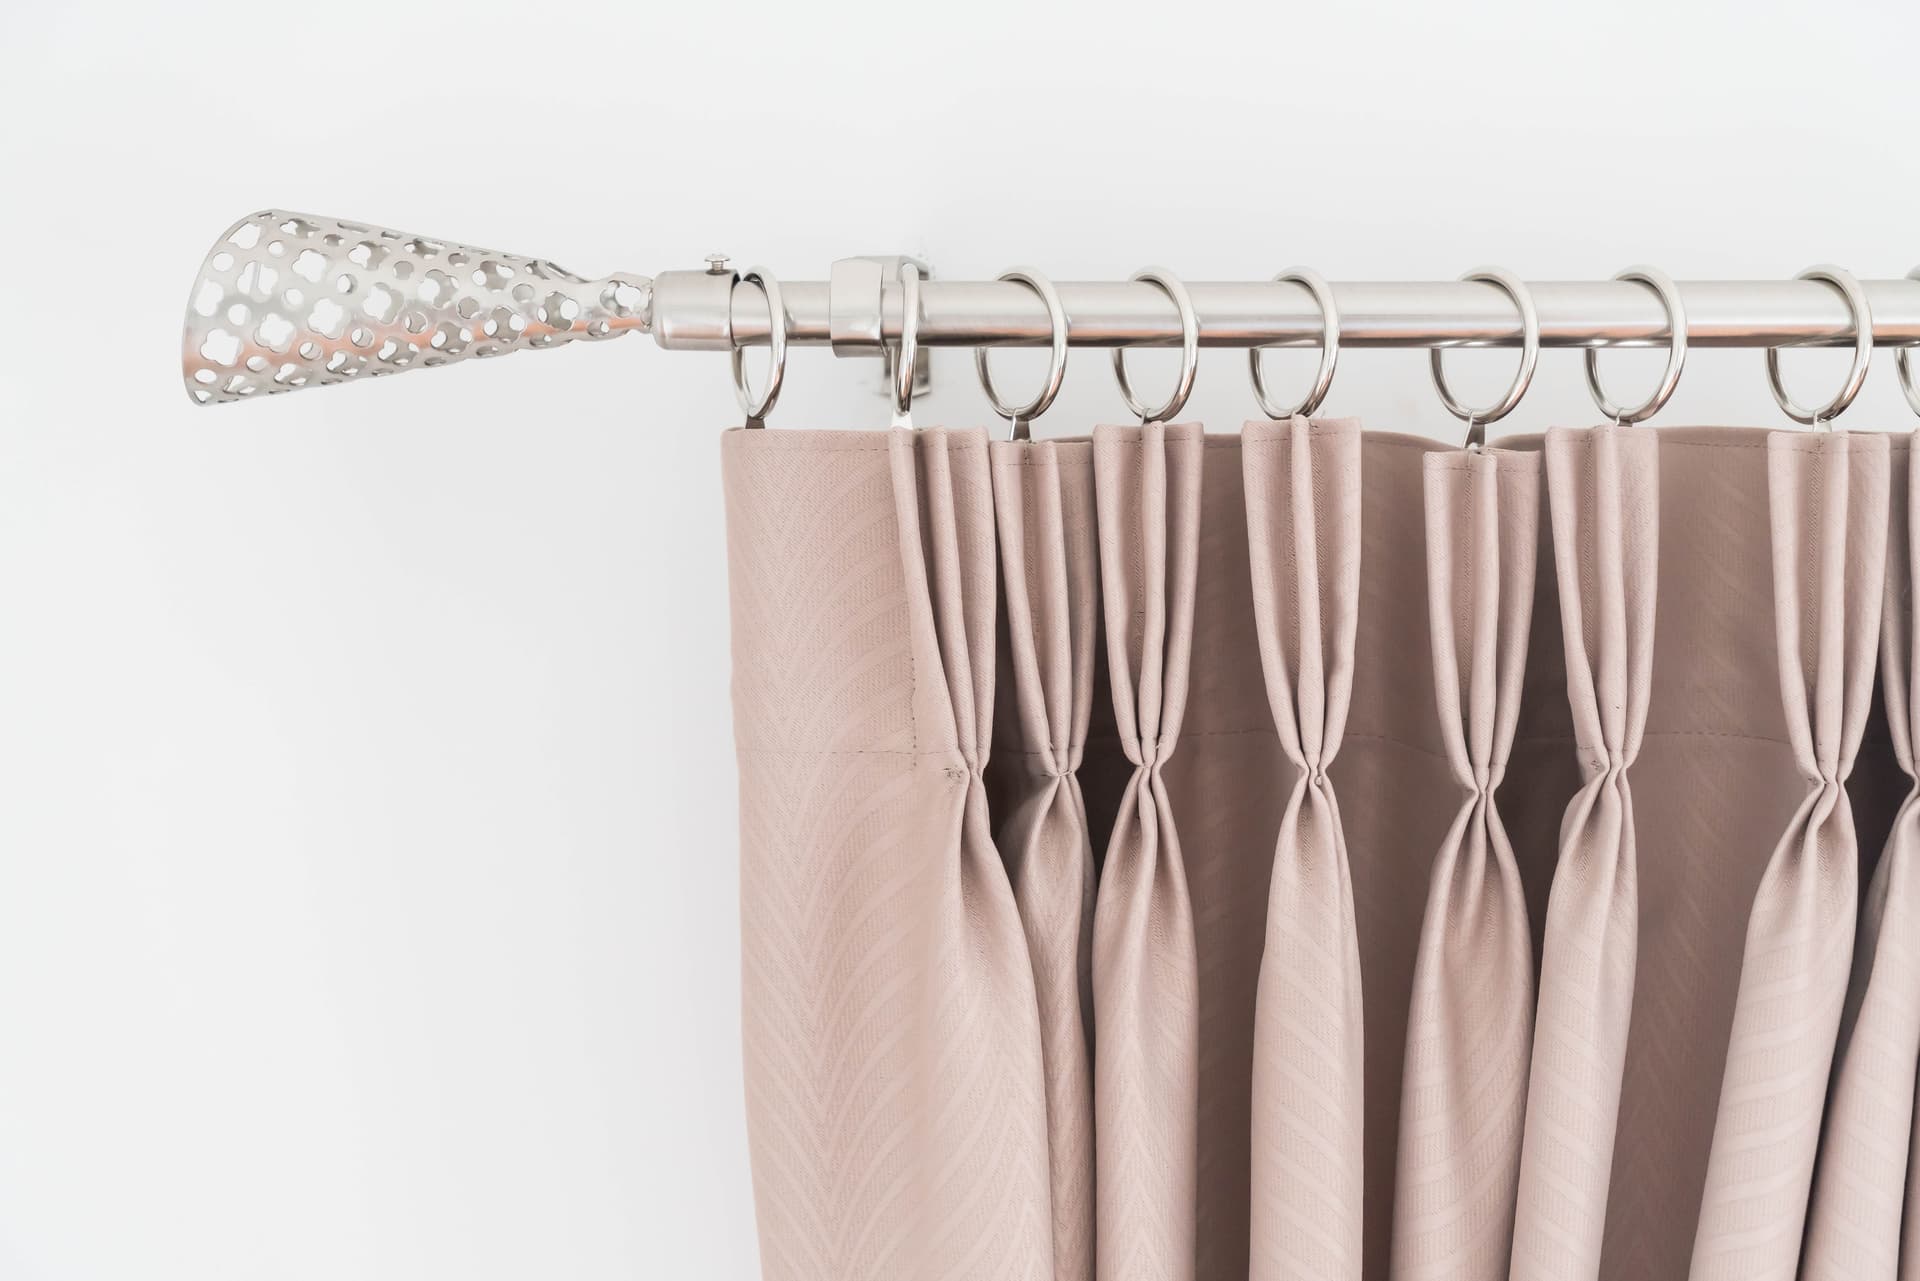 Curtain Cleaning Made Easy: A Step-by-Step Guide